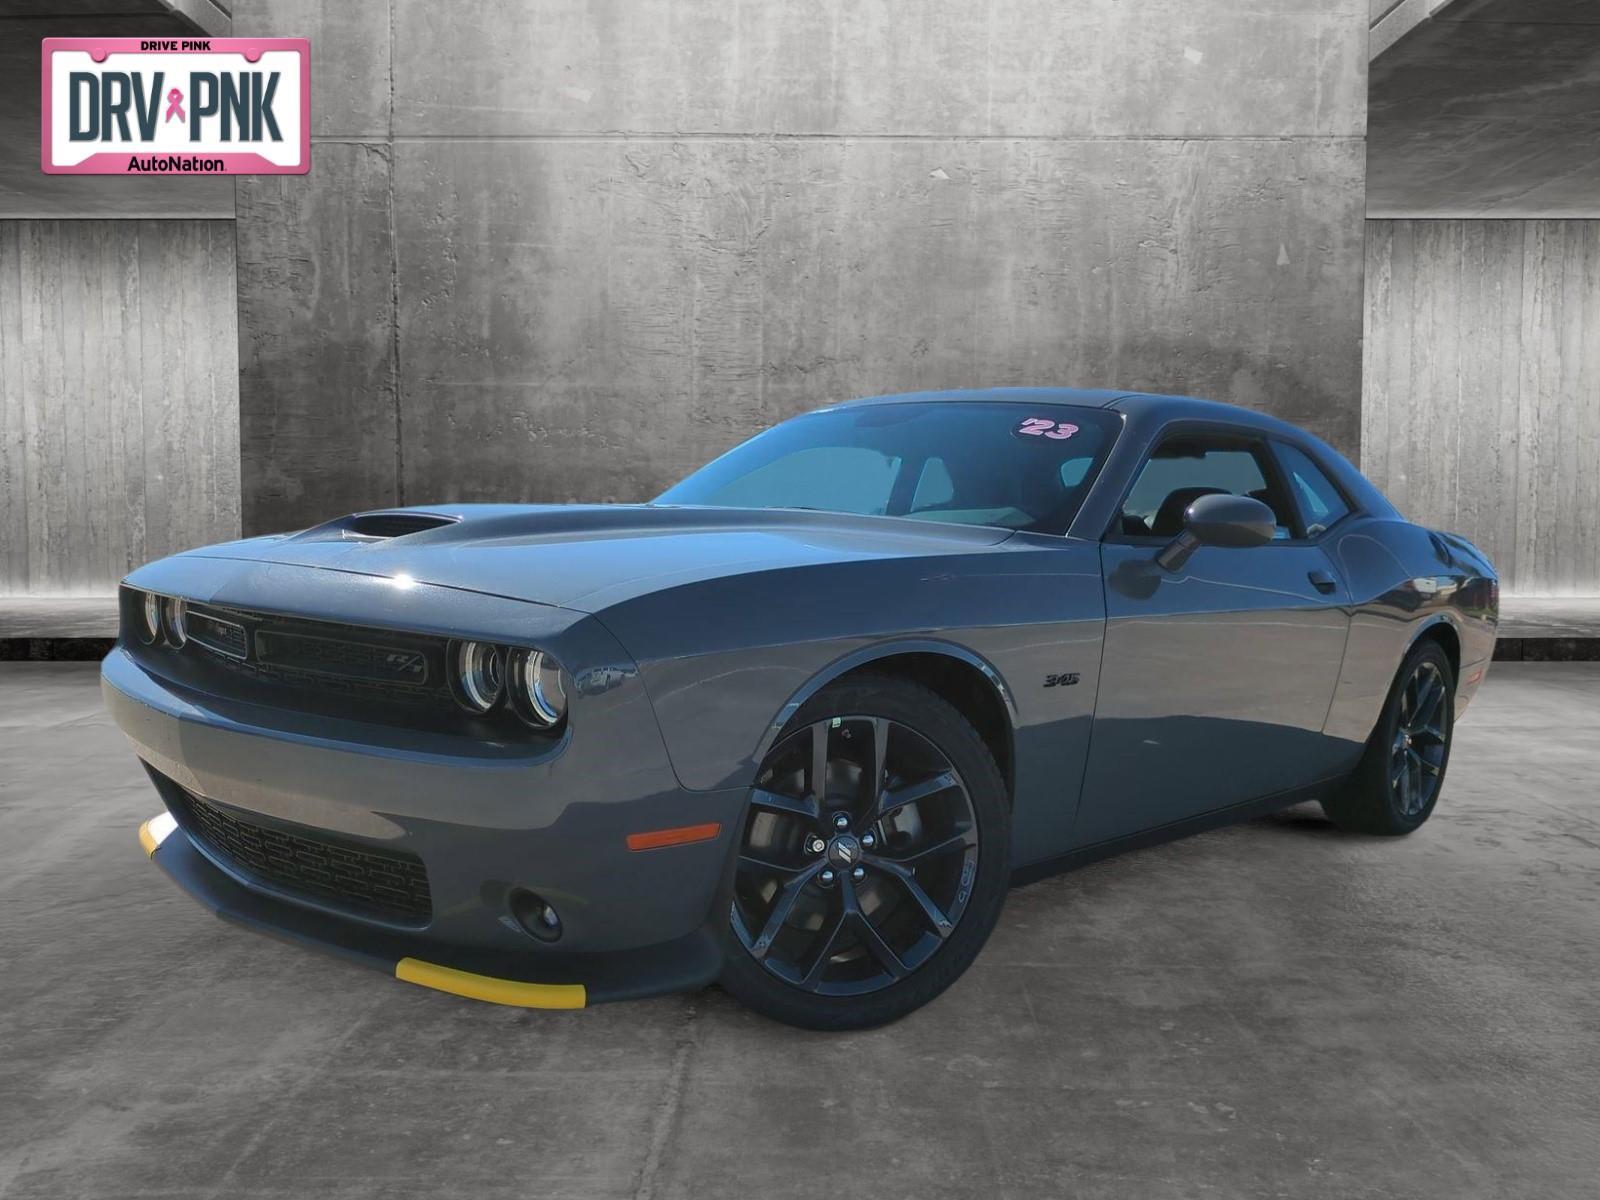 NEW 2023 Dodge Challenger for sale in Katy, TX, 77450 - AutoNation